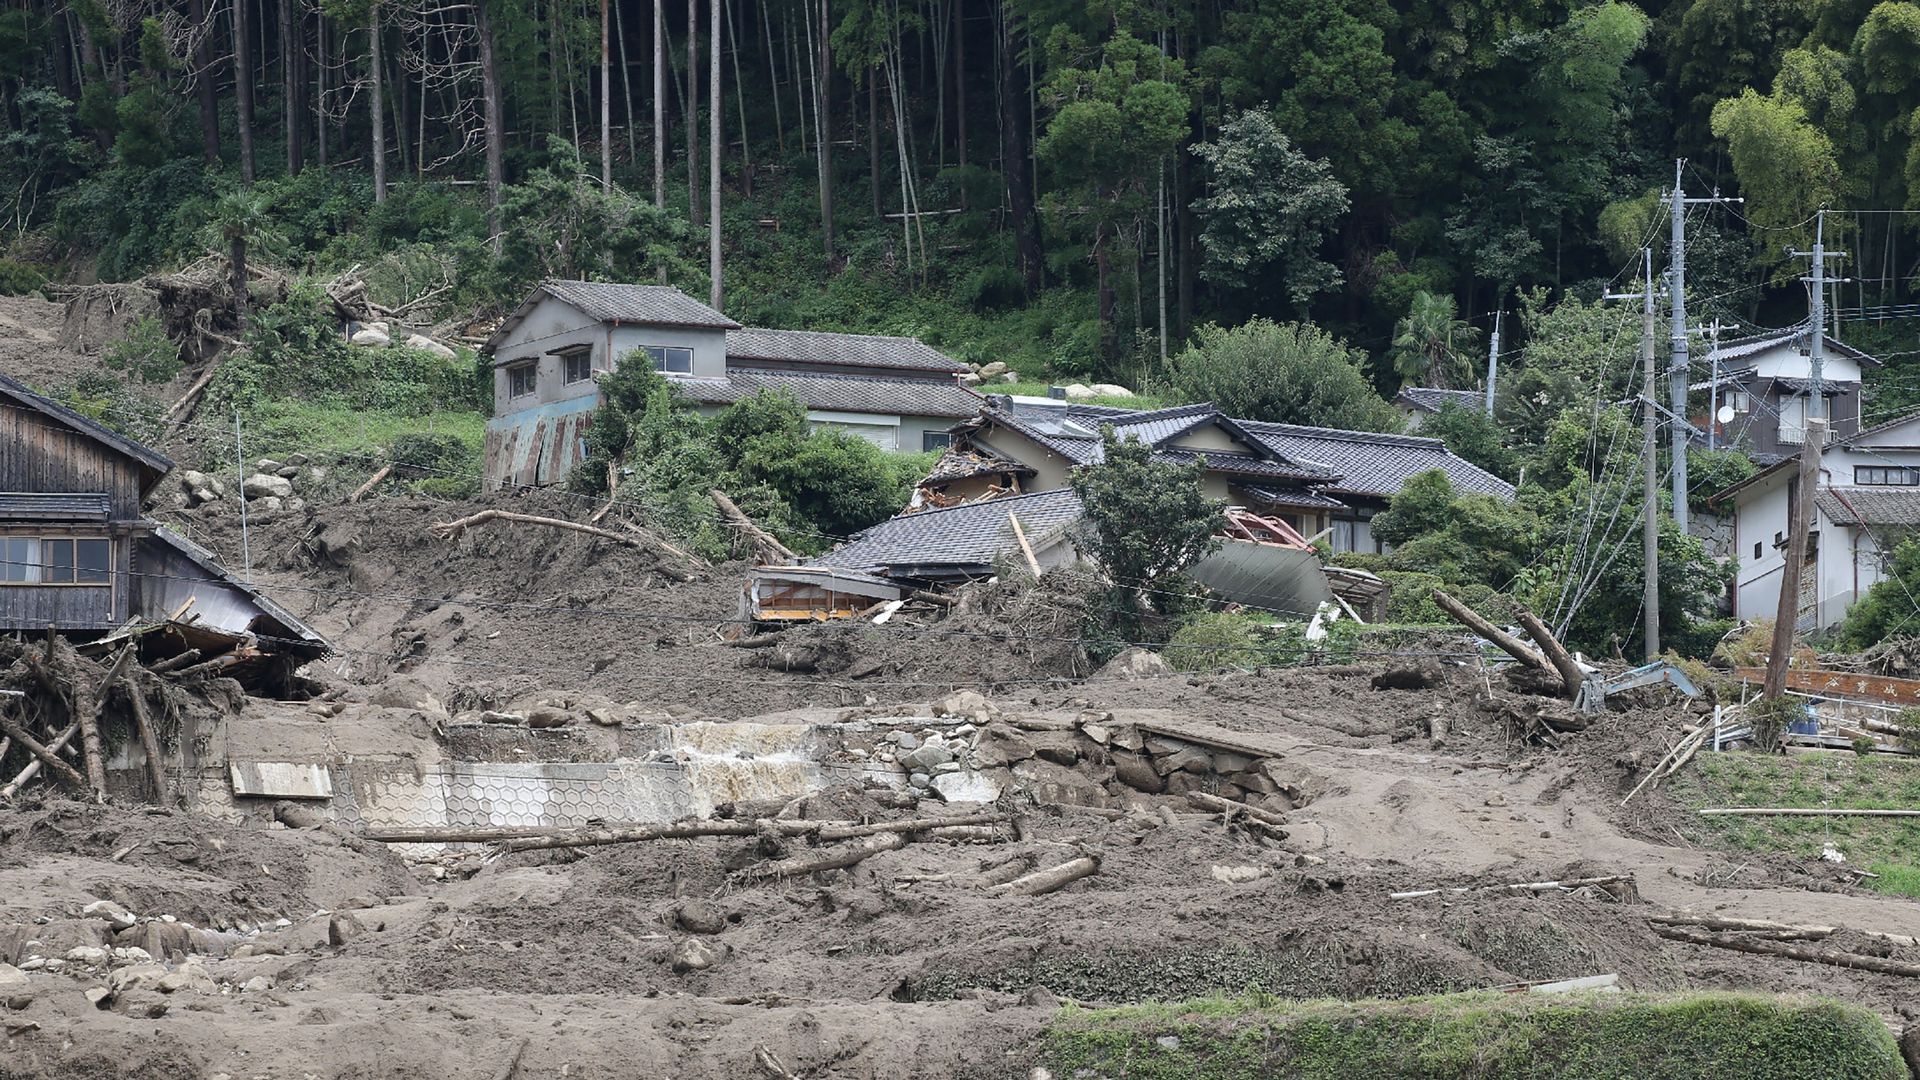 The site of a landslide caused by heavy rain in Kanzaki City, Saga Prefecture on August 15